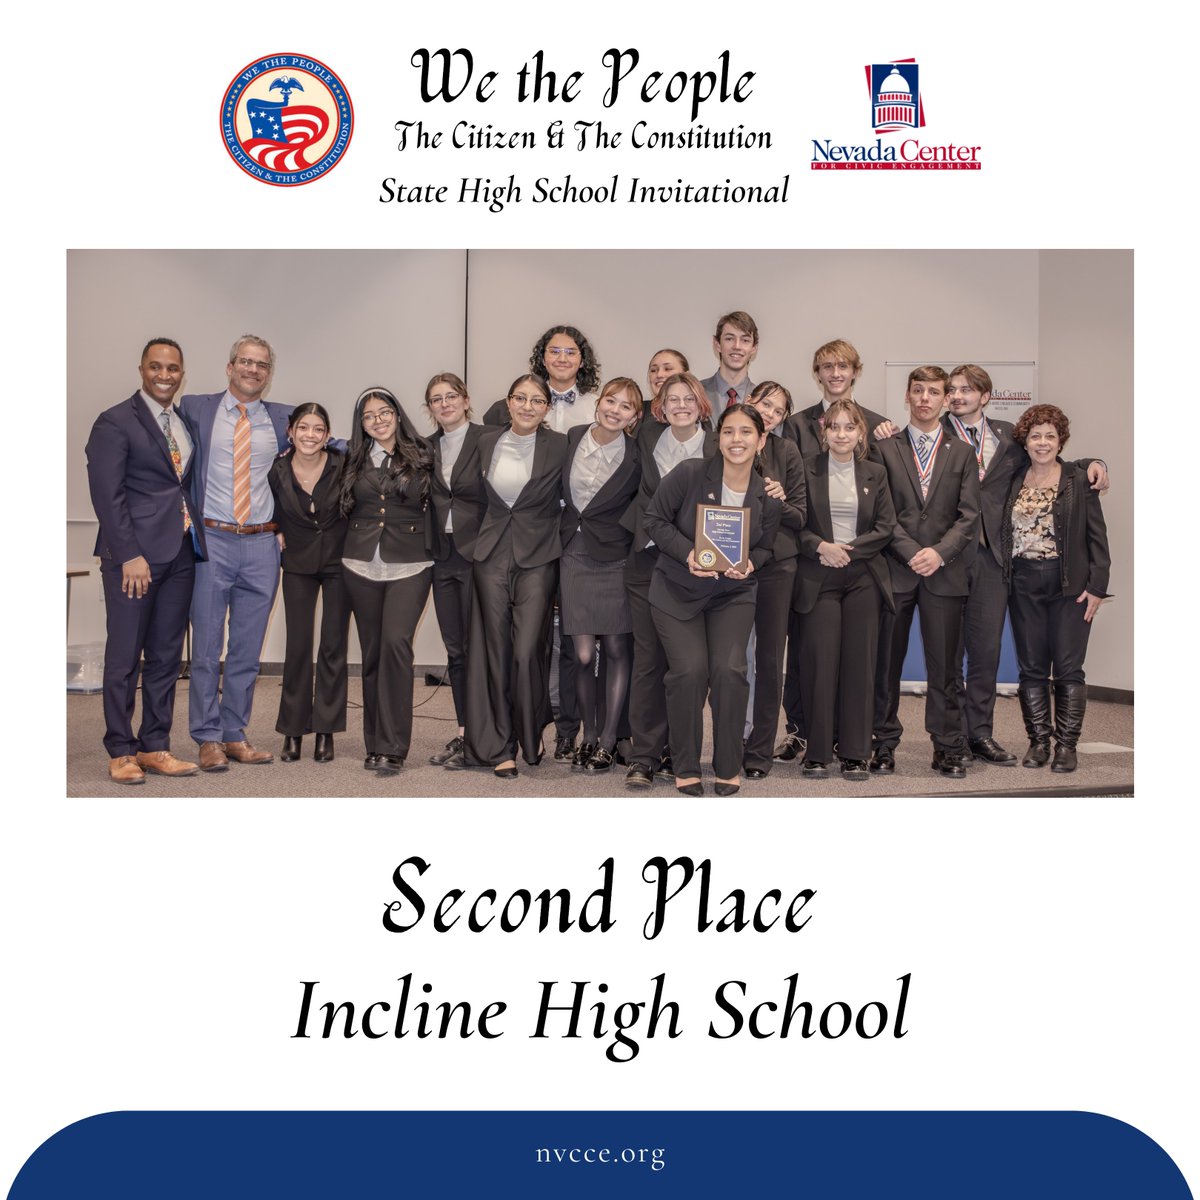 🌟Good luck to the Reno High School and Incline High School 'We the People' teams competing at the national competition in Washington DC this weekend! Let's show them our support as they represent Washoe County School District with pride! 🎉 #WeThePeople #WeAreWCSD #WCSDProud